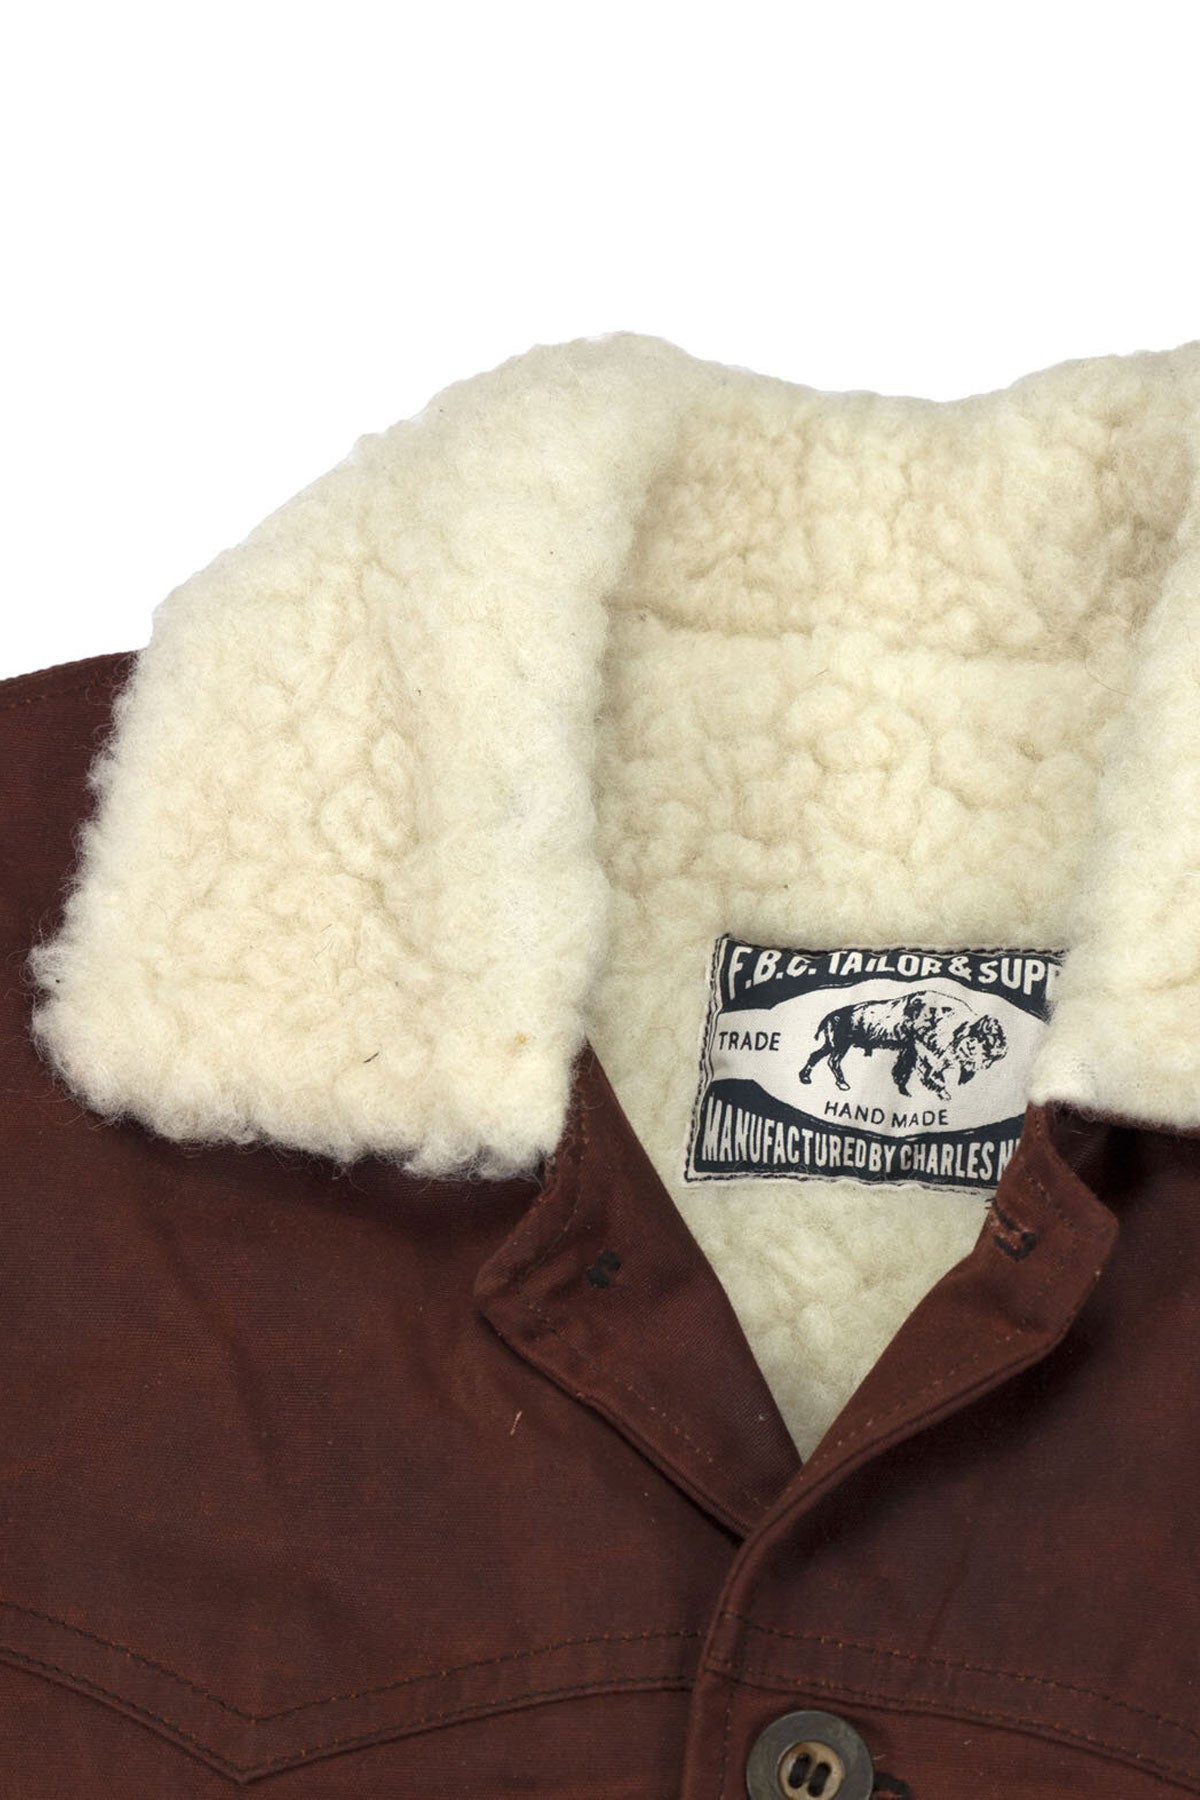 FBC Tailor & Supply - Waxed Canvas Sherpa Coat in Burgundy